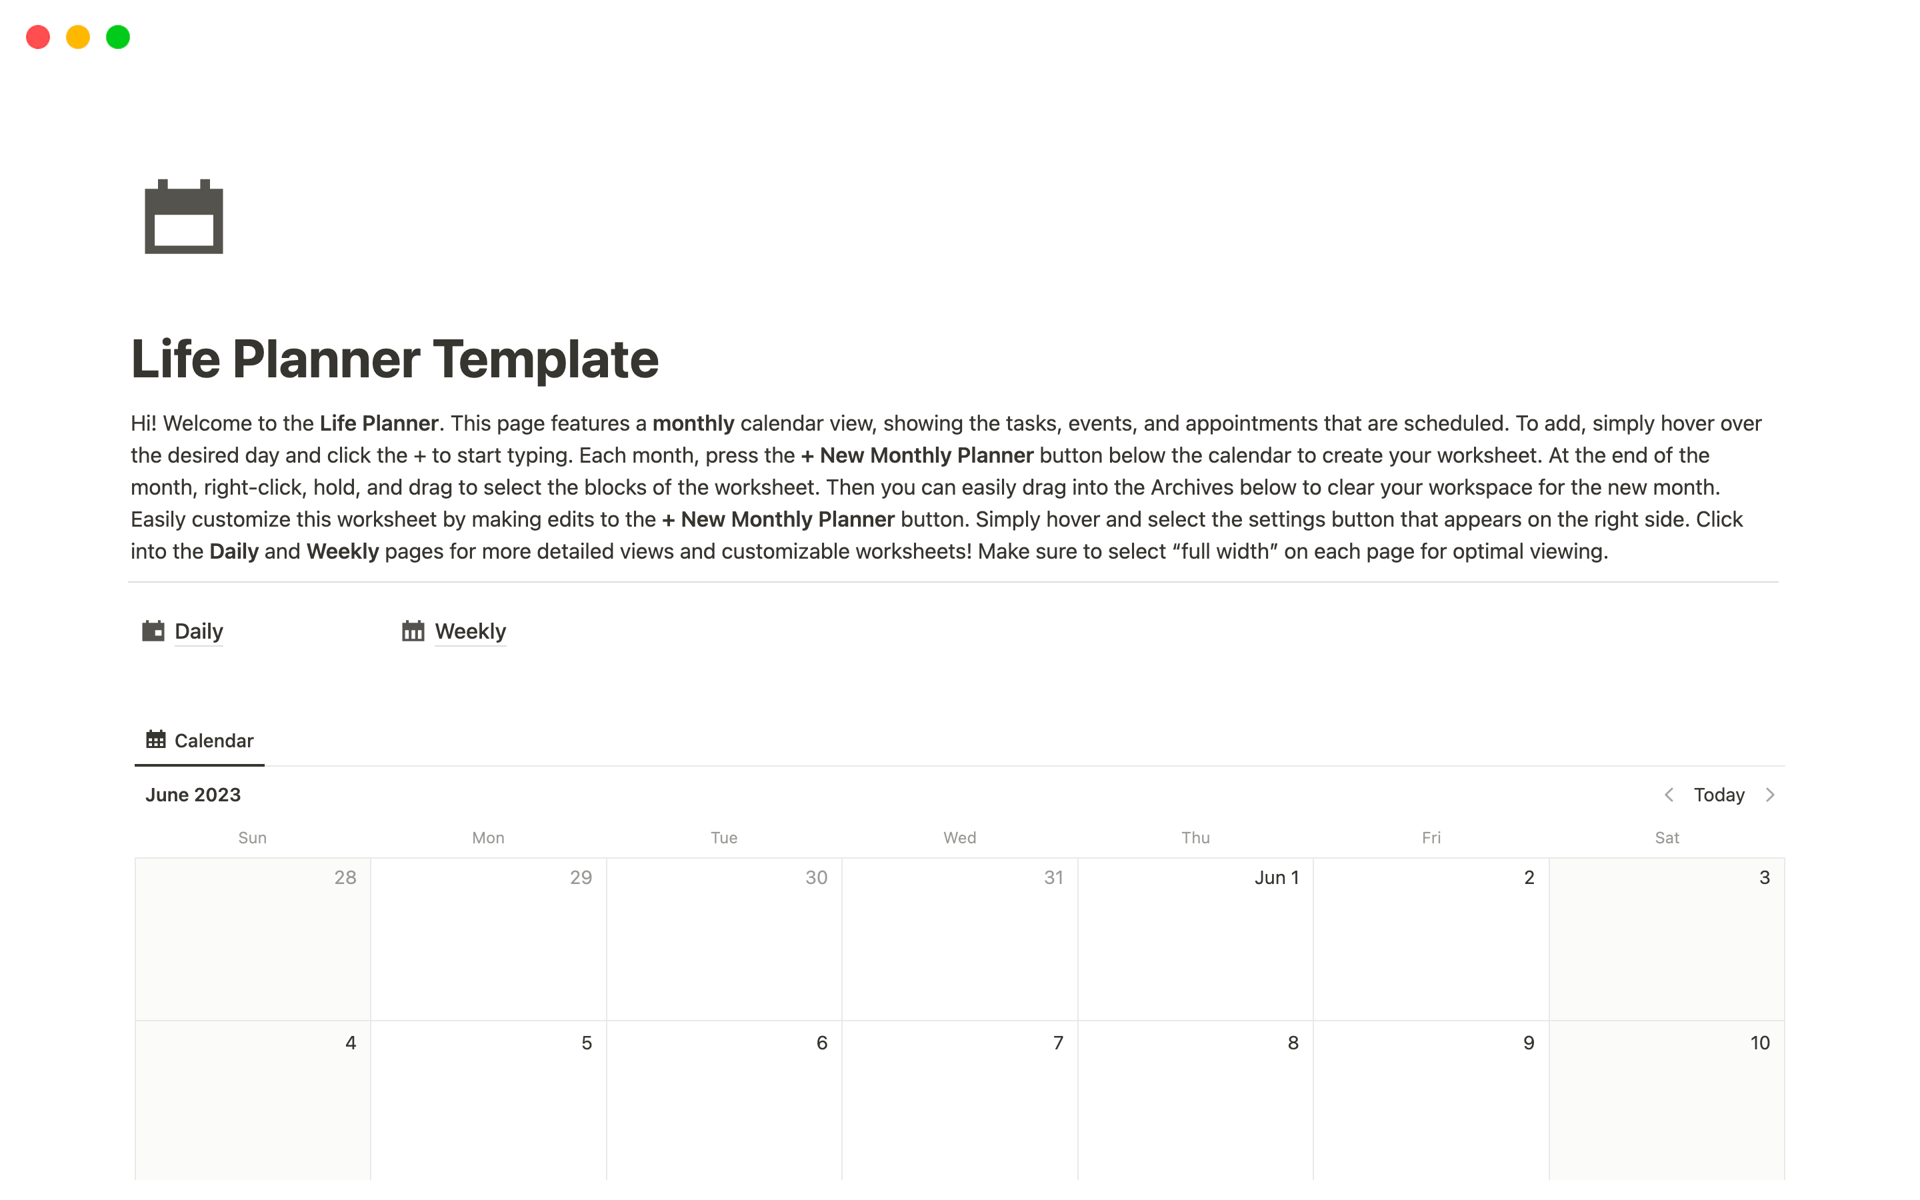 A template preview for Life Planner Template